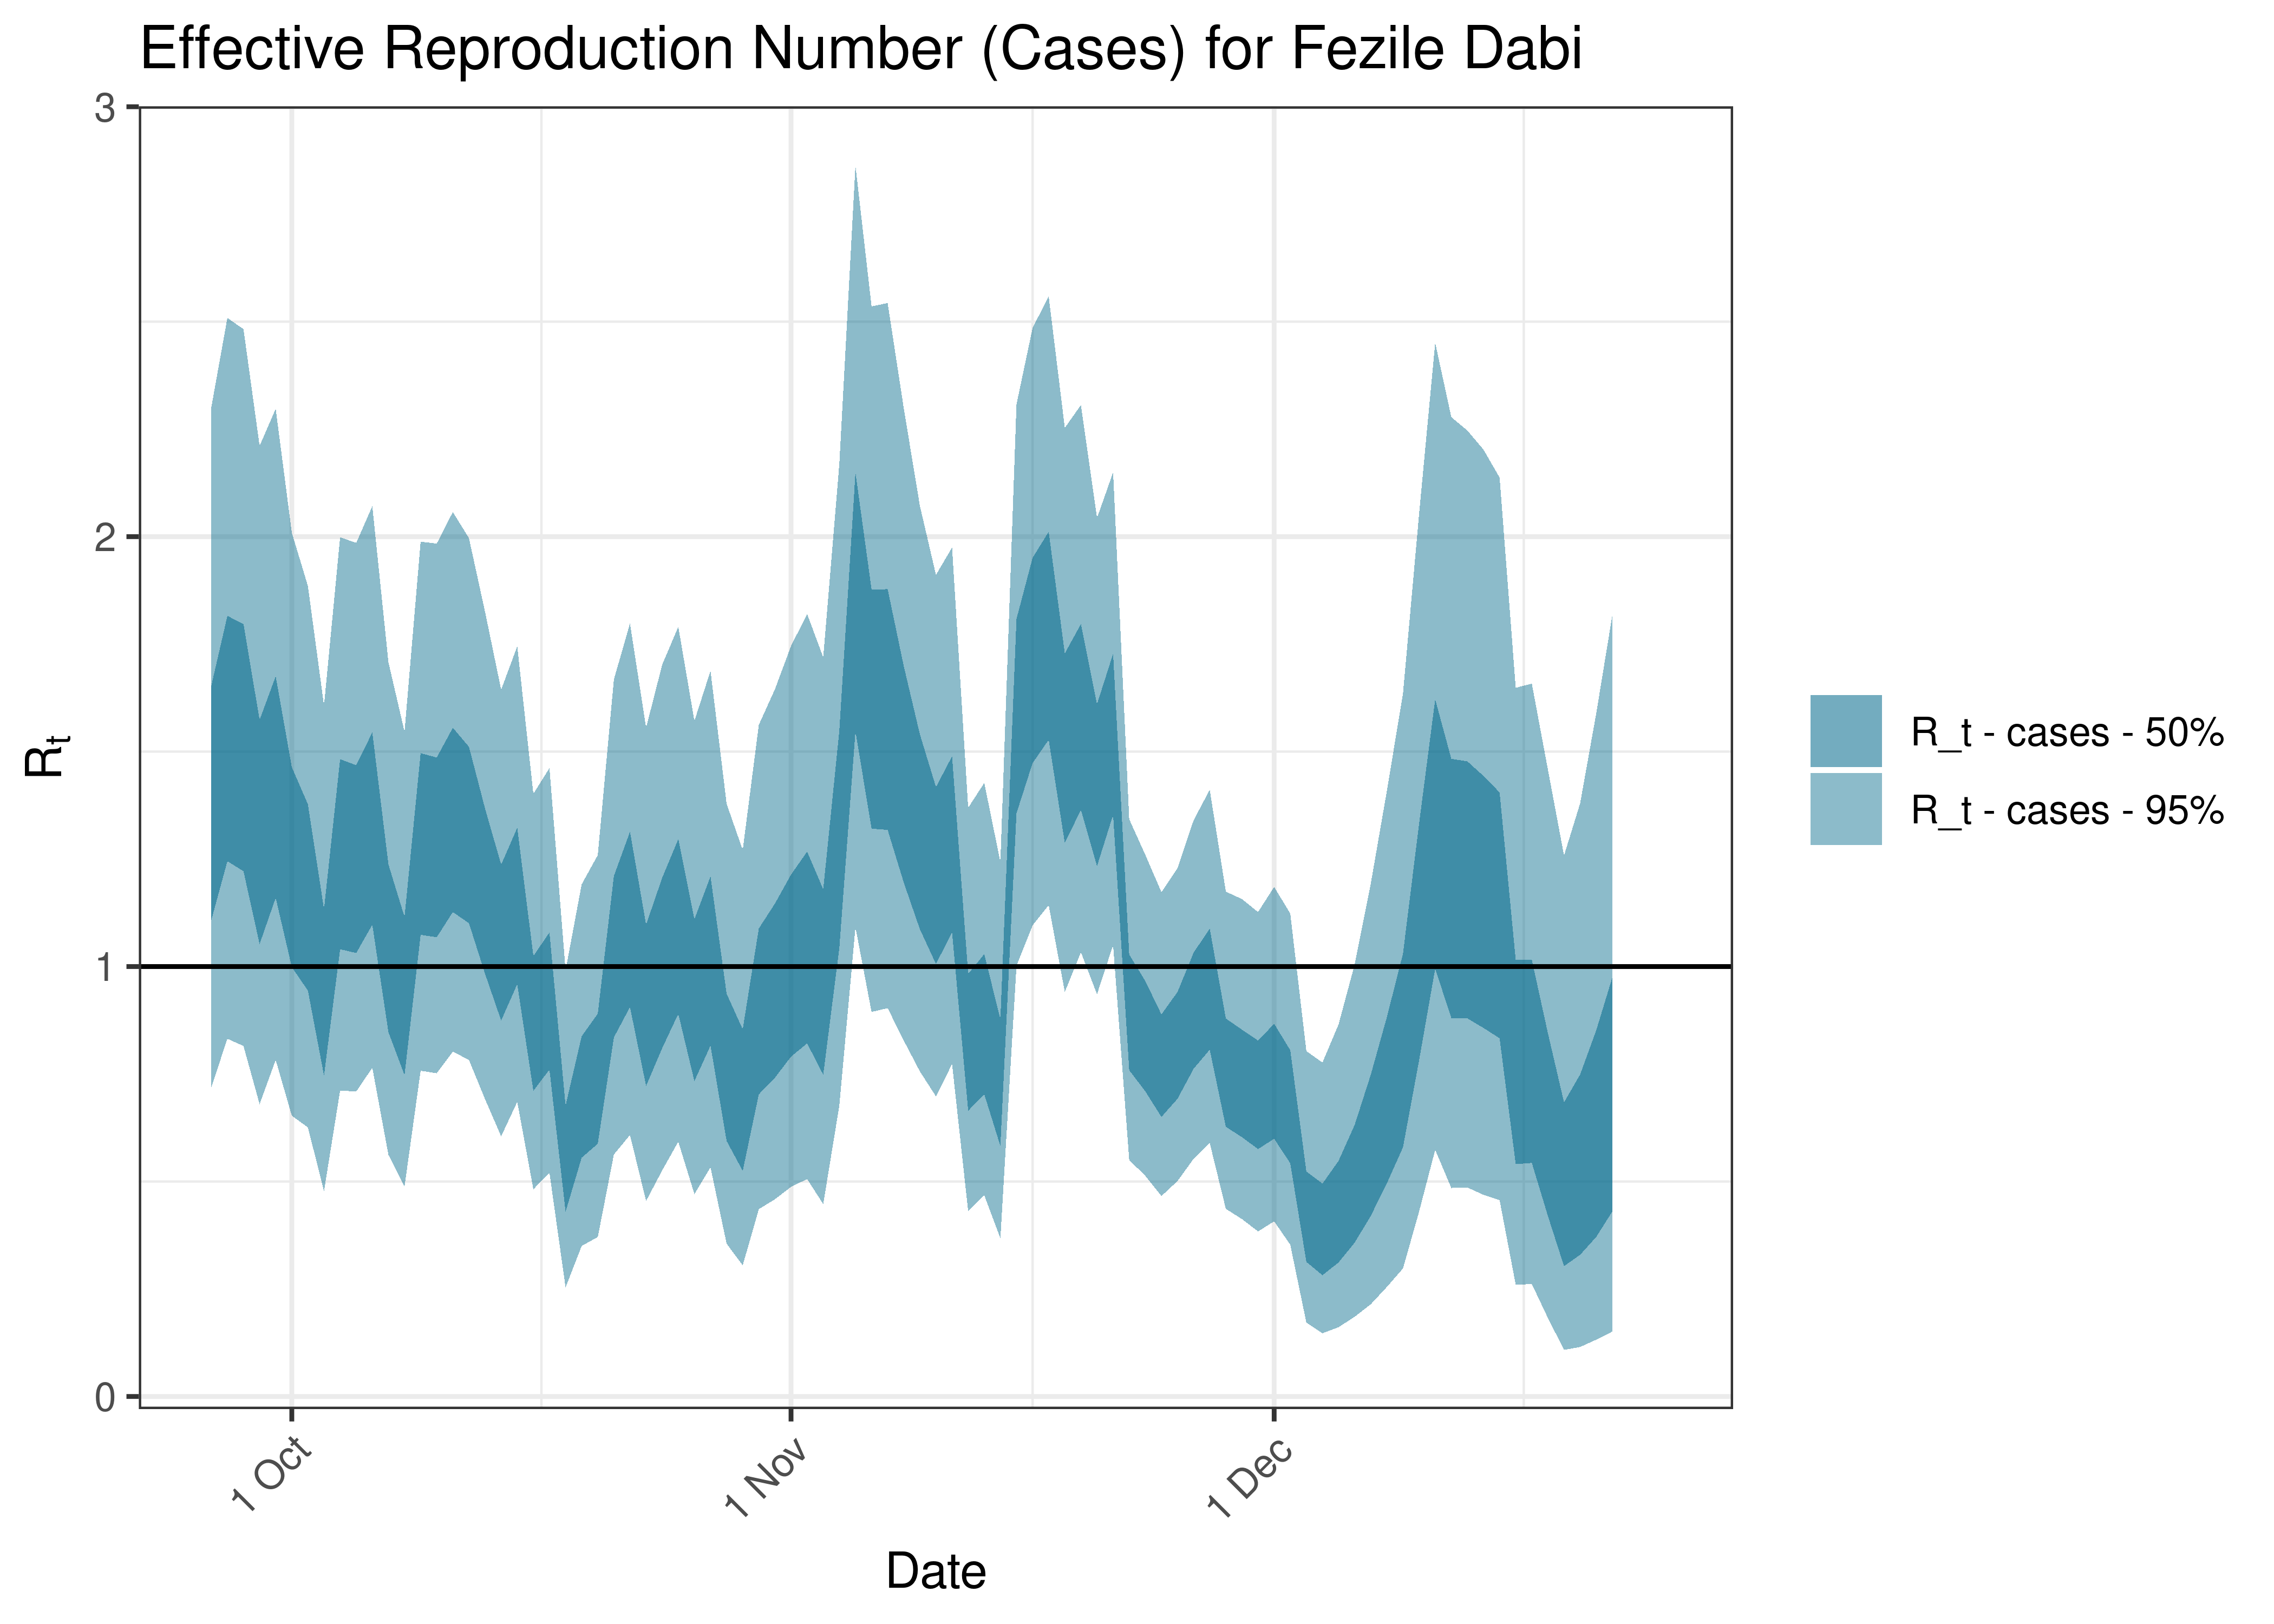 Estimated Effective Reproduction Number Based on Cases for Fezile Dabi over last 90 days